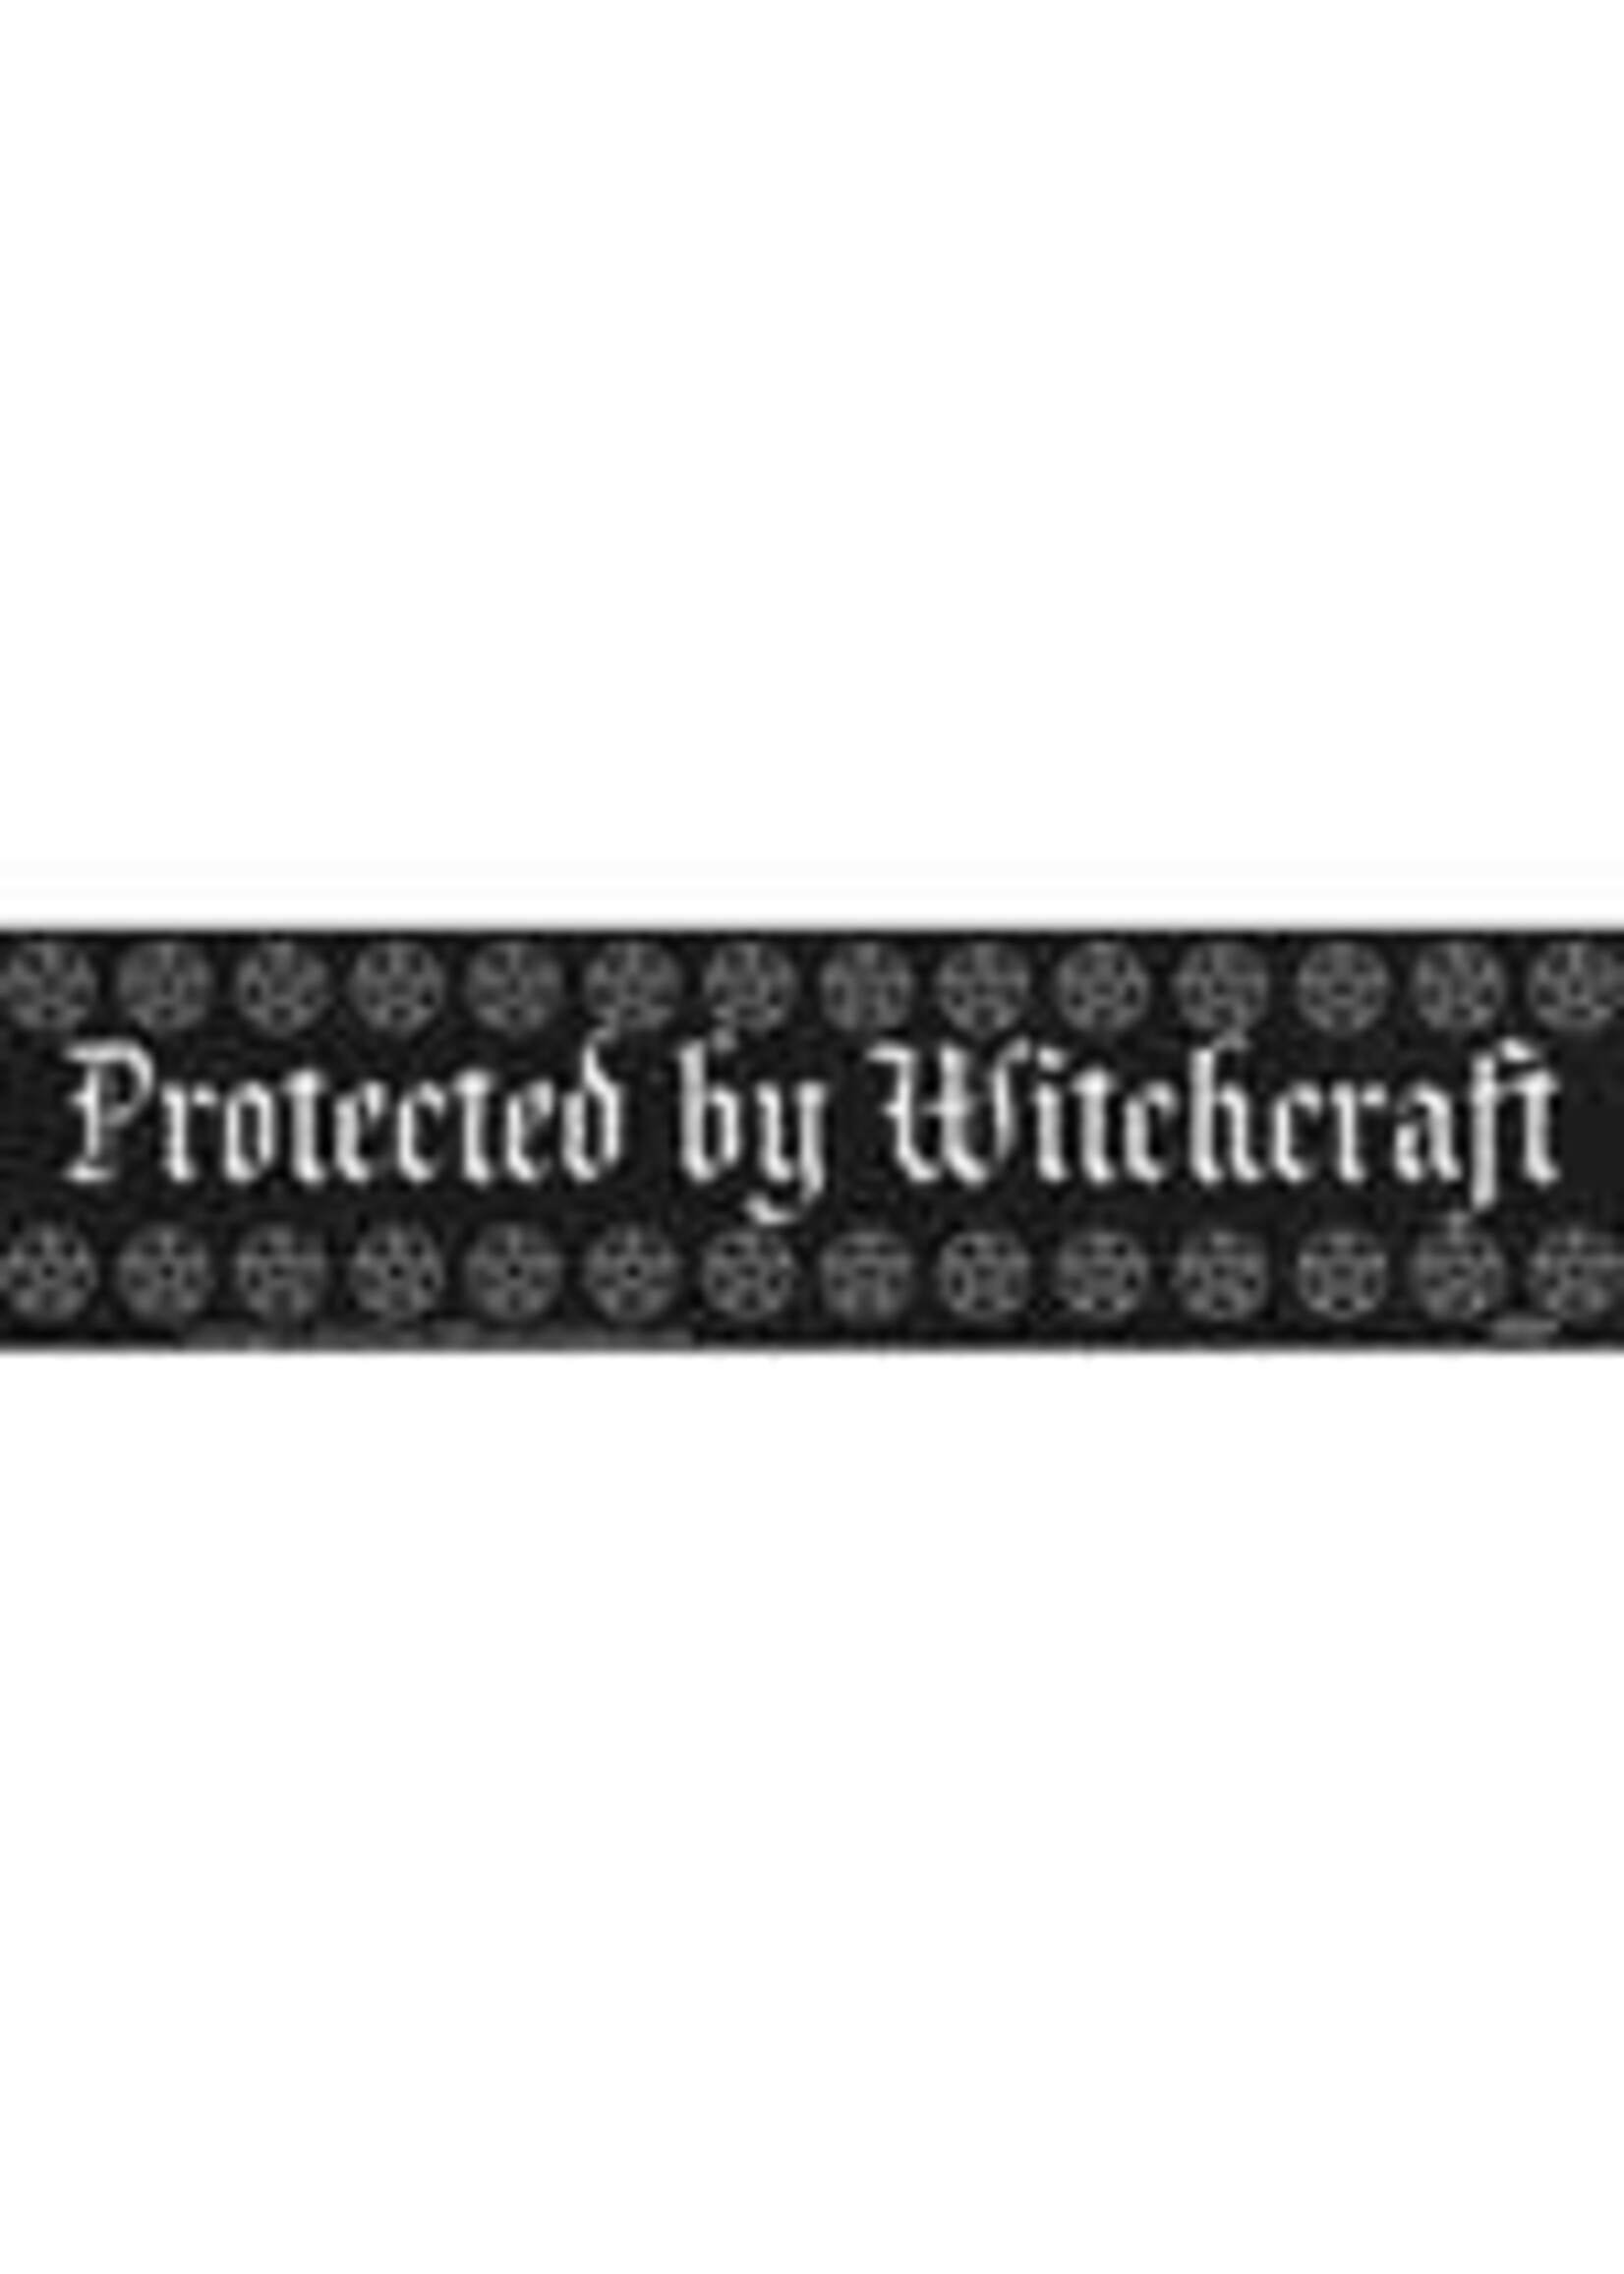 BUMP: Protected by Witchcraft (117)